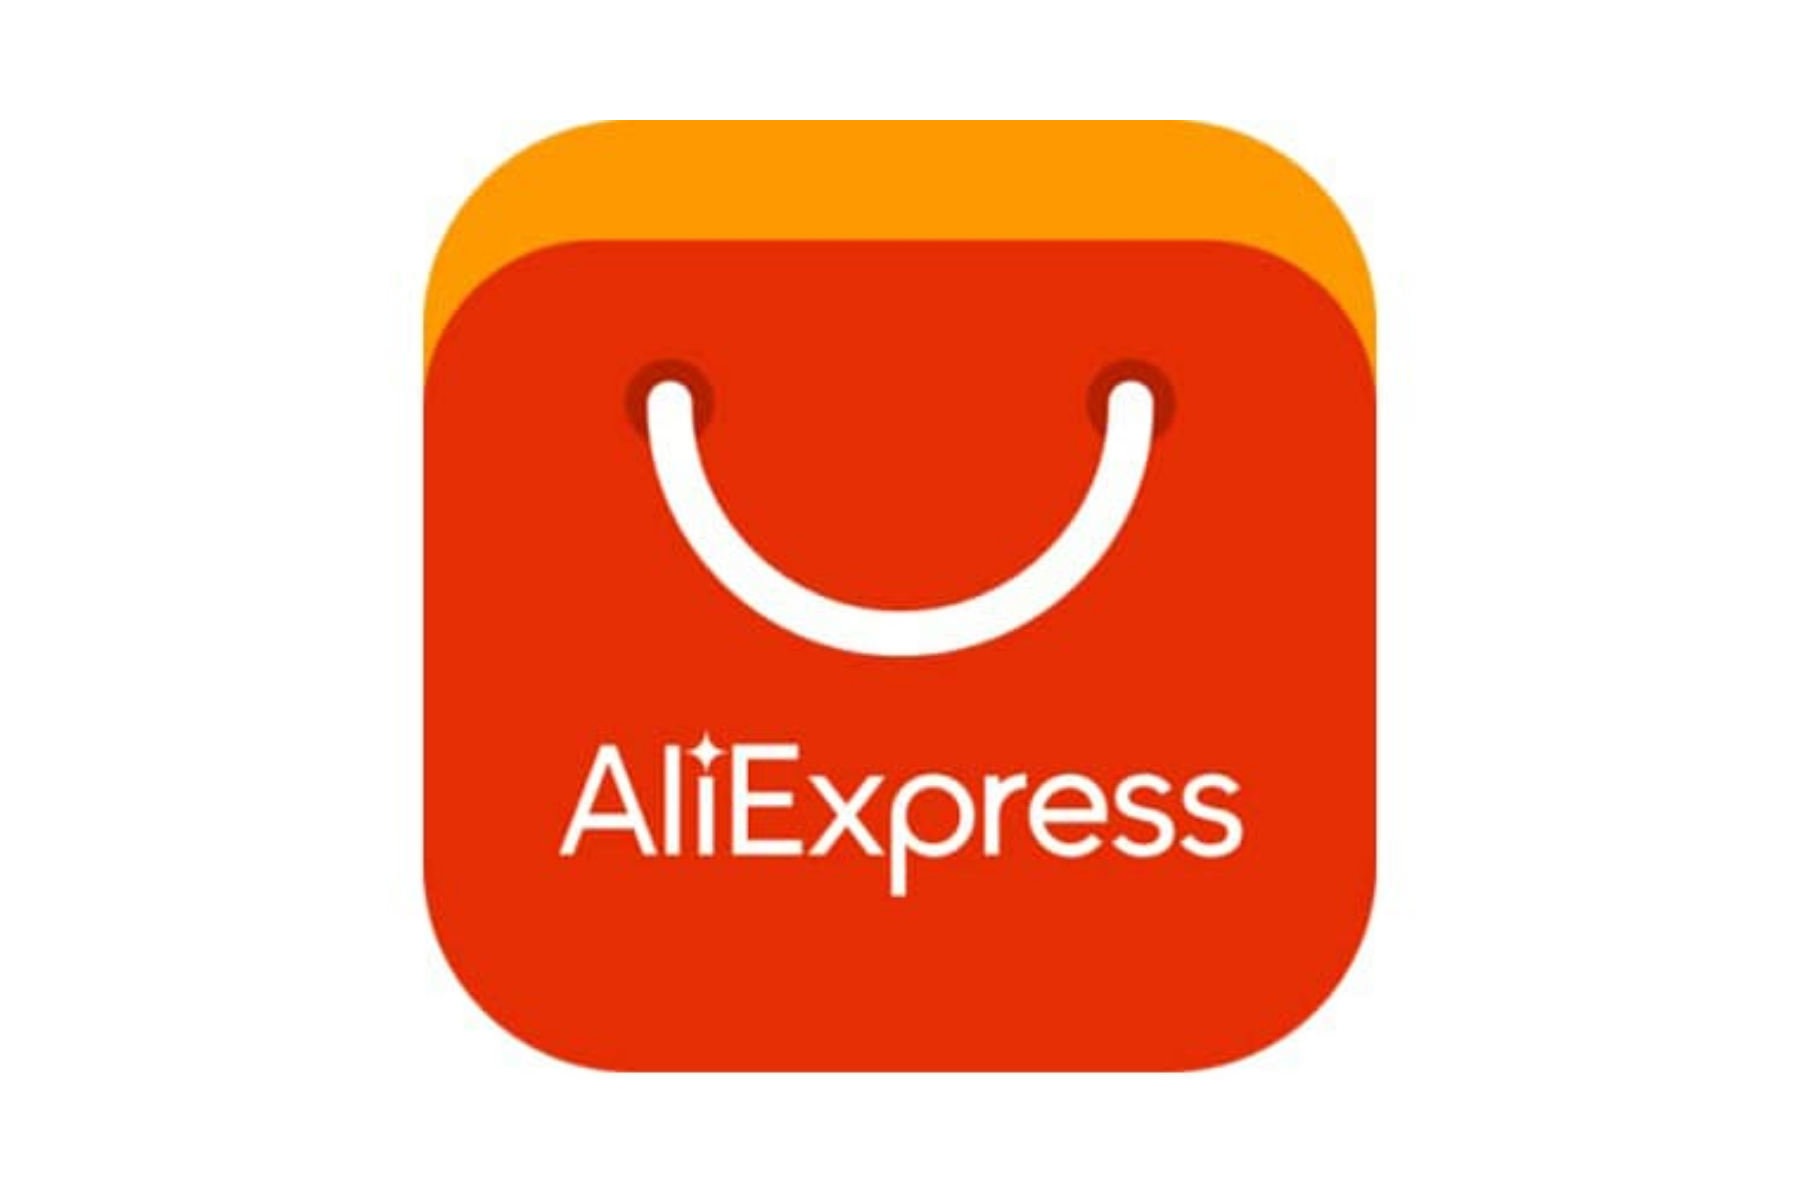 AliExpress's logo with a yellow and orange bag and a white holder